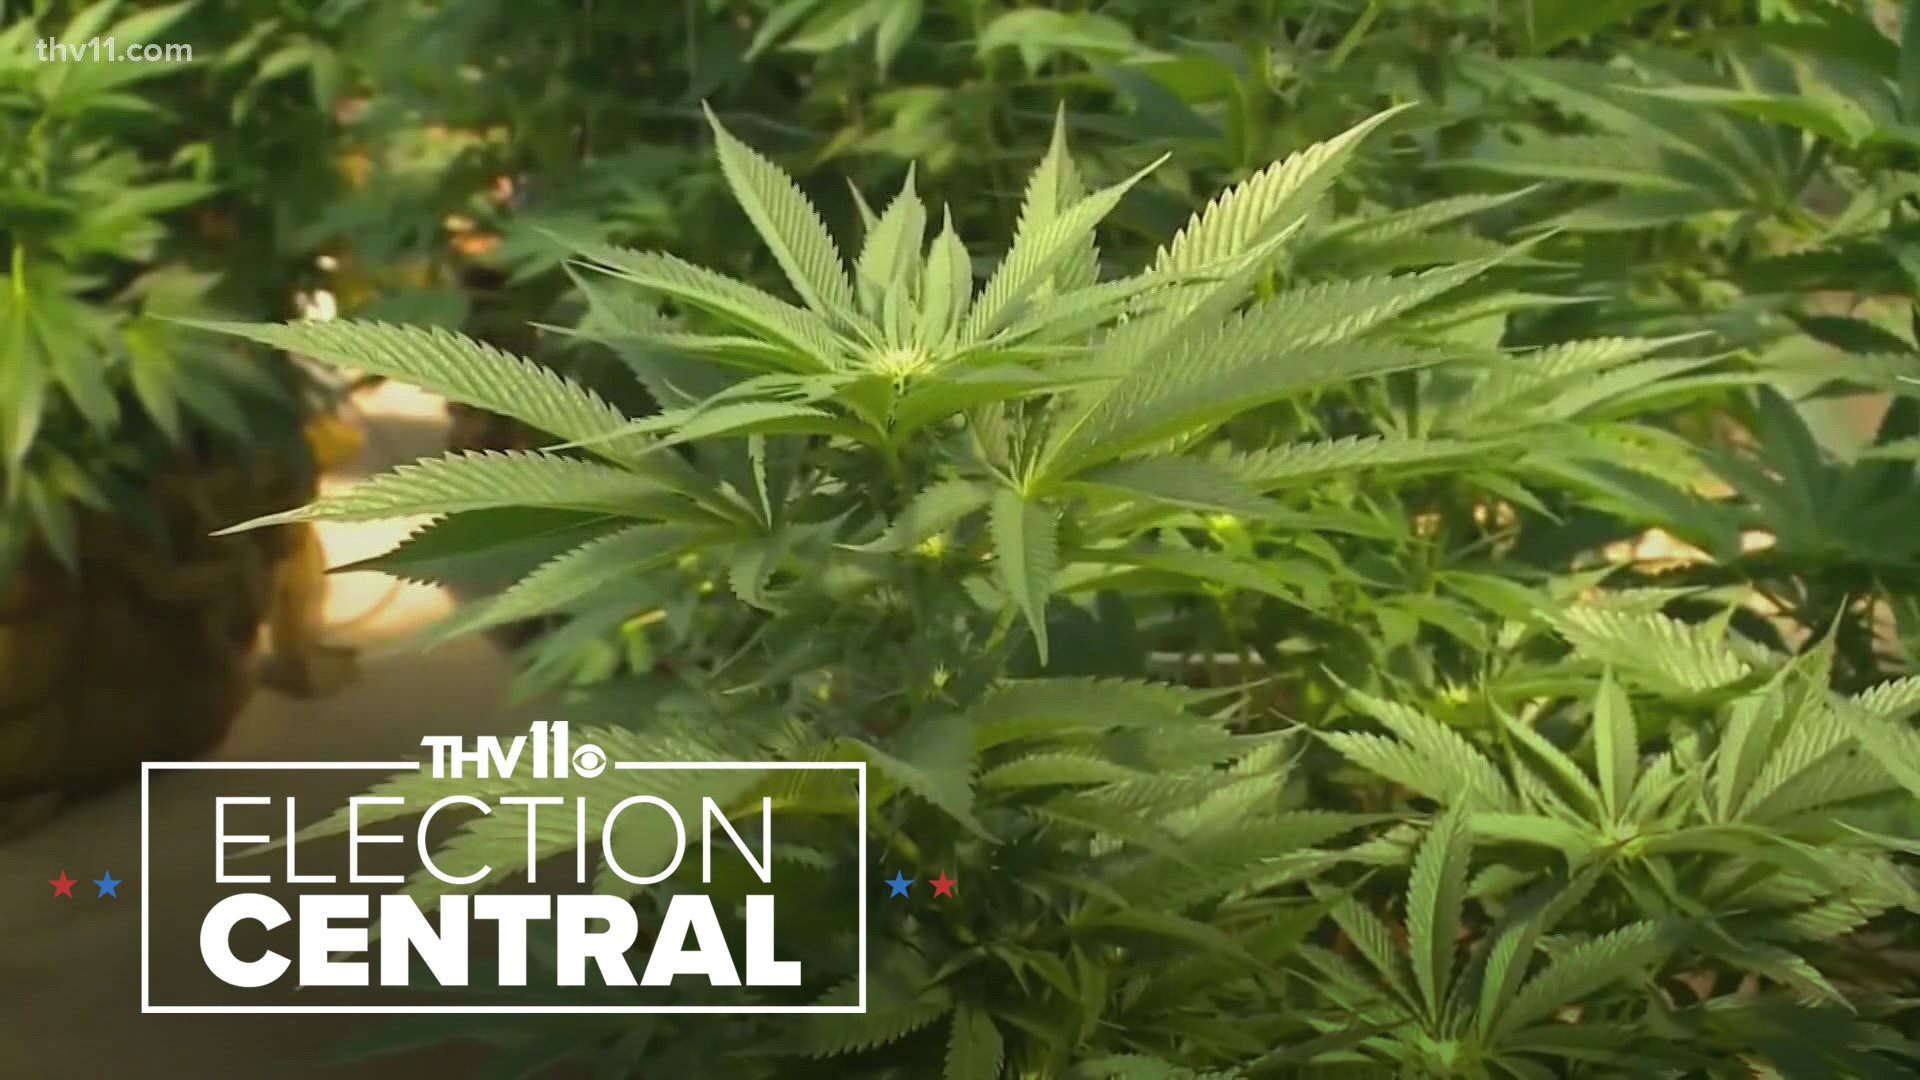 One of the biggest and most debated issues on this year's ballot is the push to legalize recreational marijuana in Arkansas.